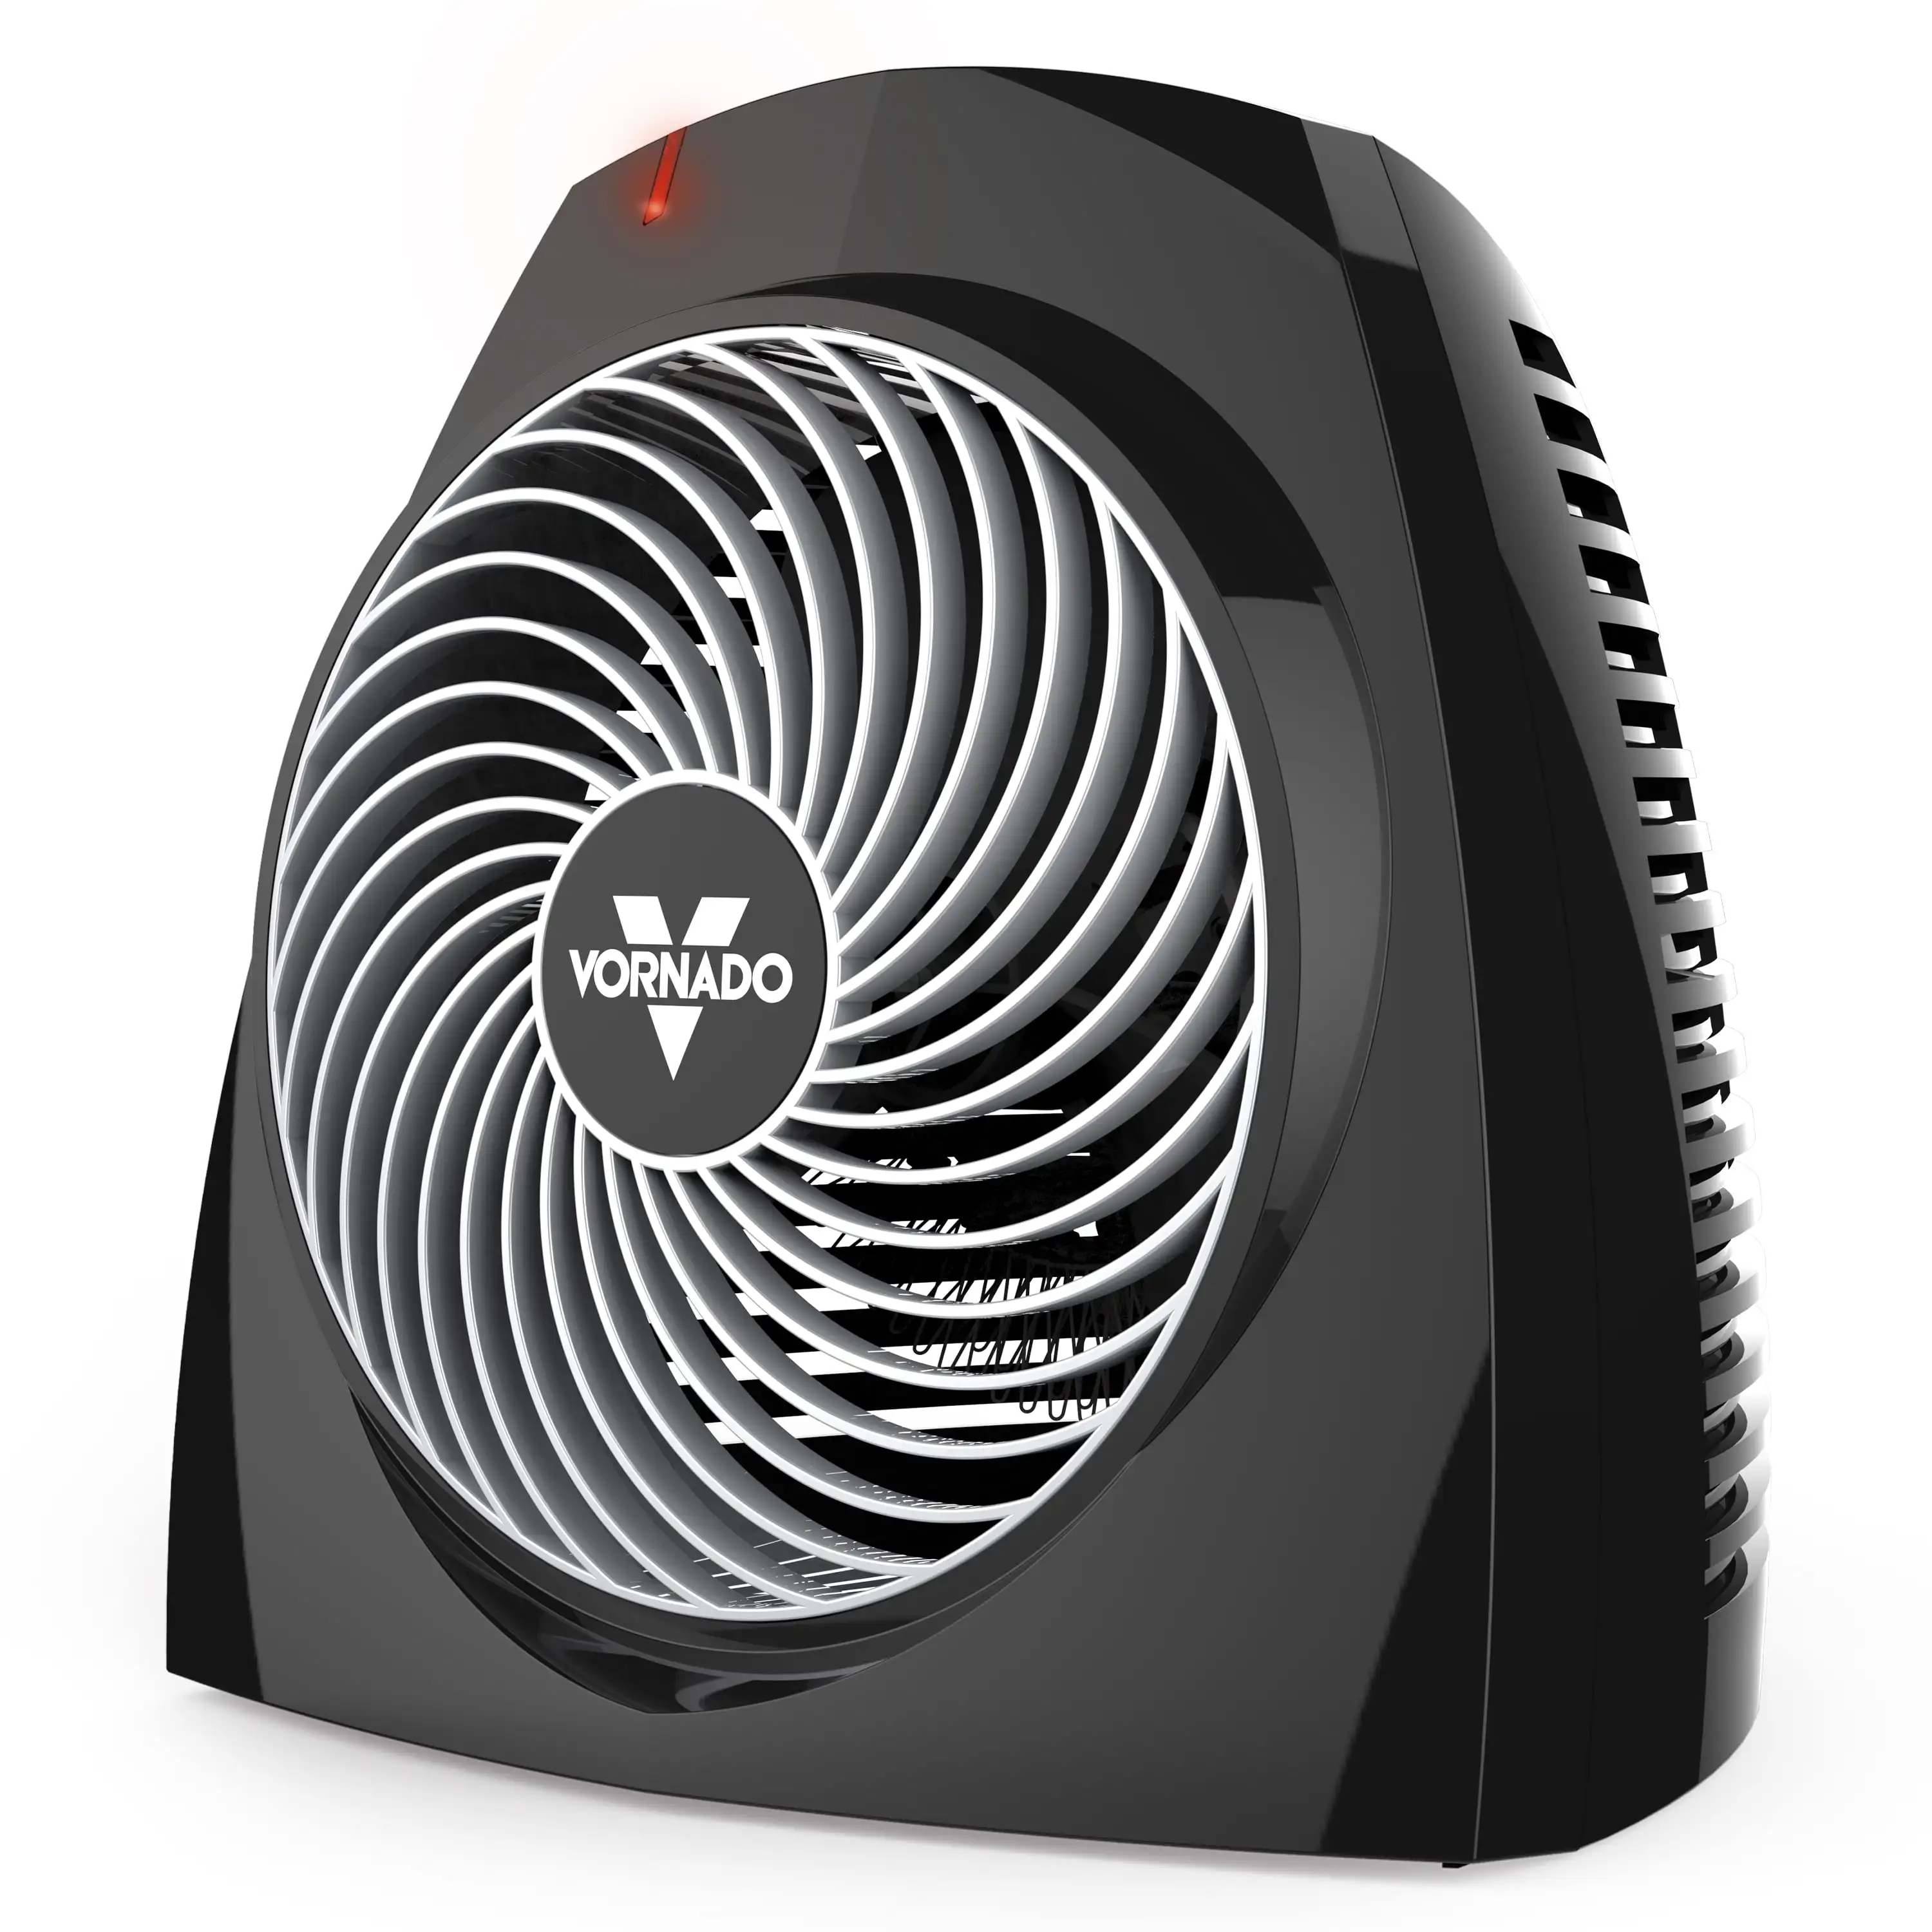 Indoor heating VH200 Personal Space Heater With Vortex Circulation Technology, Black for room home warmer